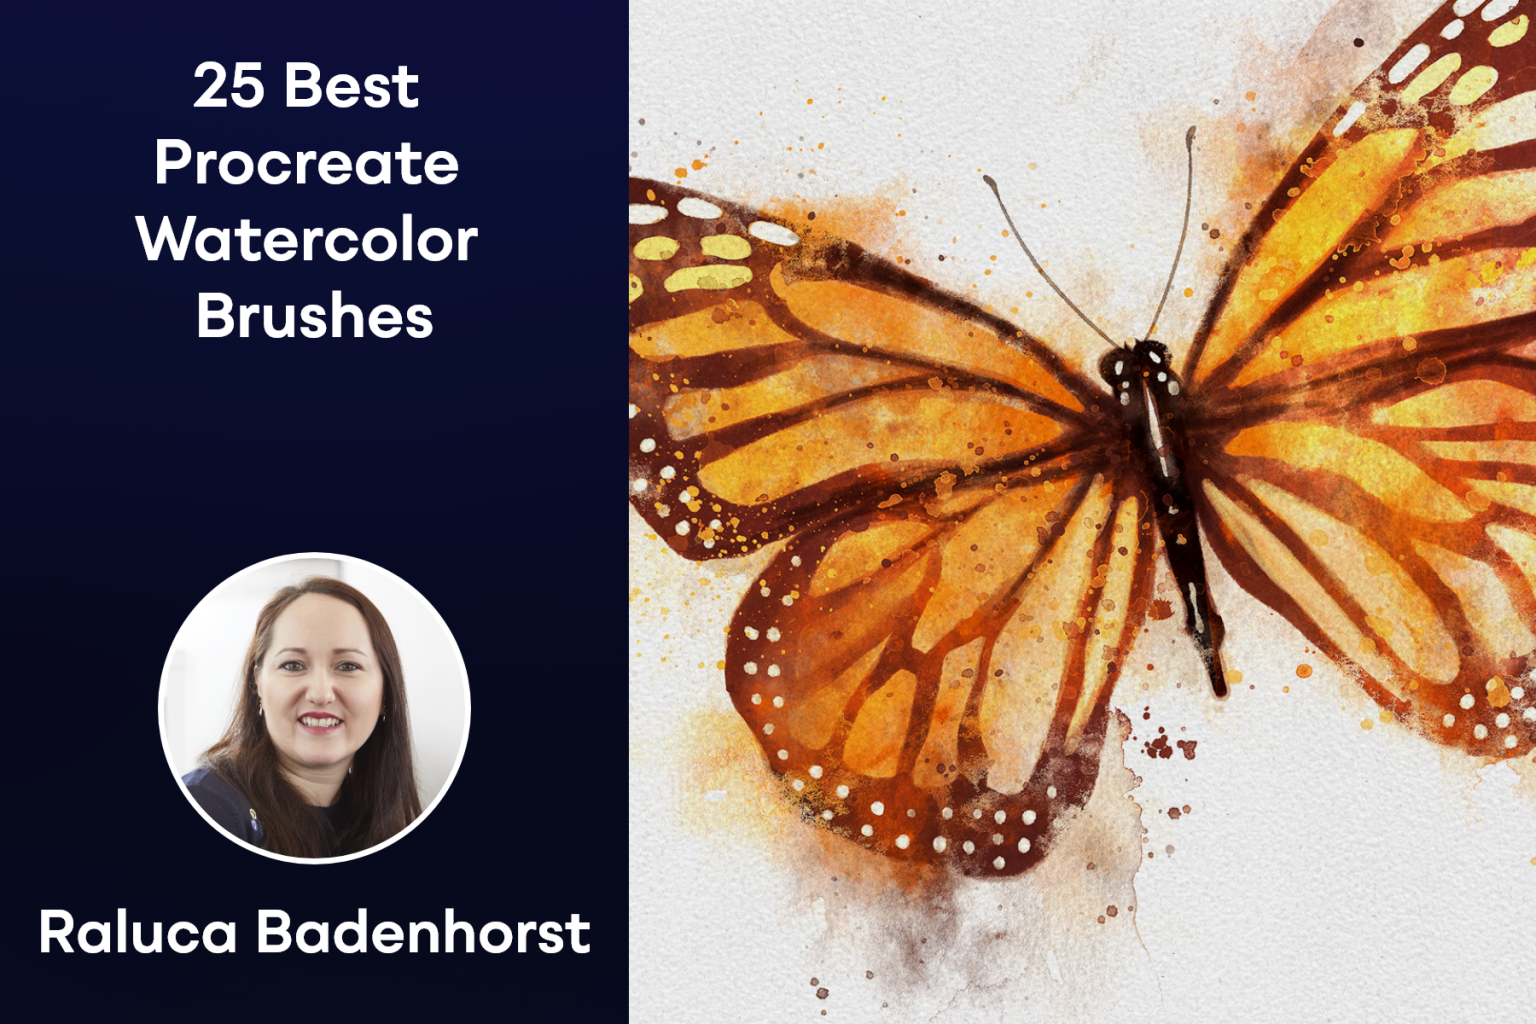 25 Best Procreate Watercolor Brushes